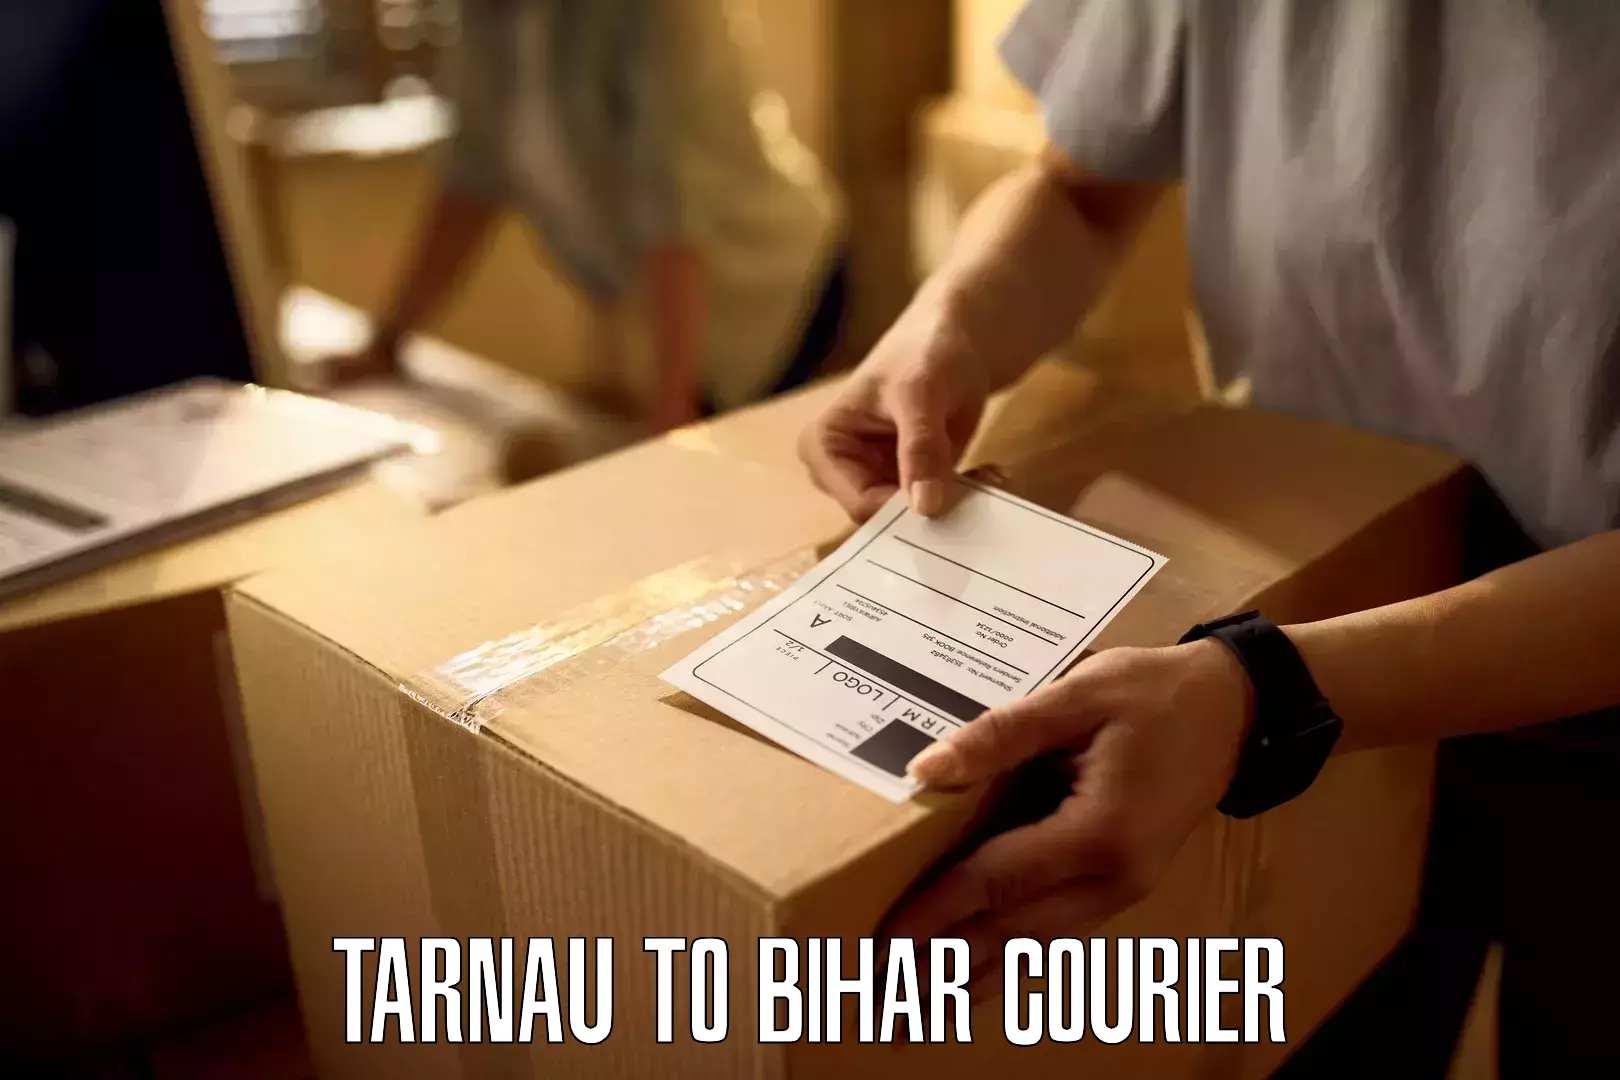 State-of-the-art courier technology in Tarnau to Rajgir